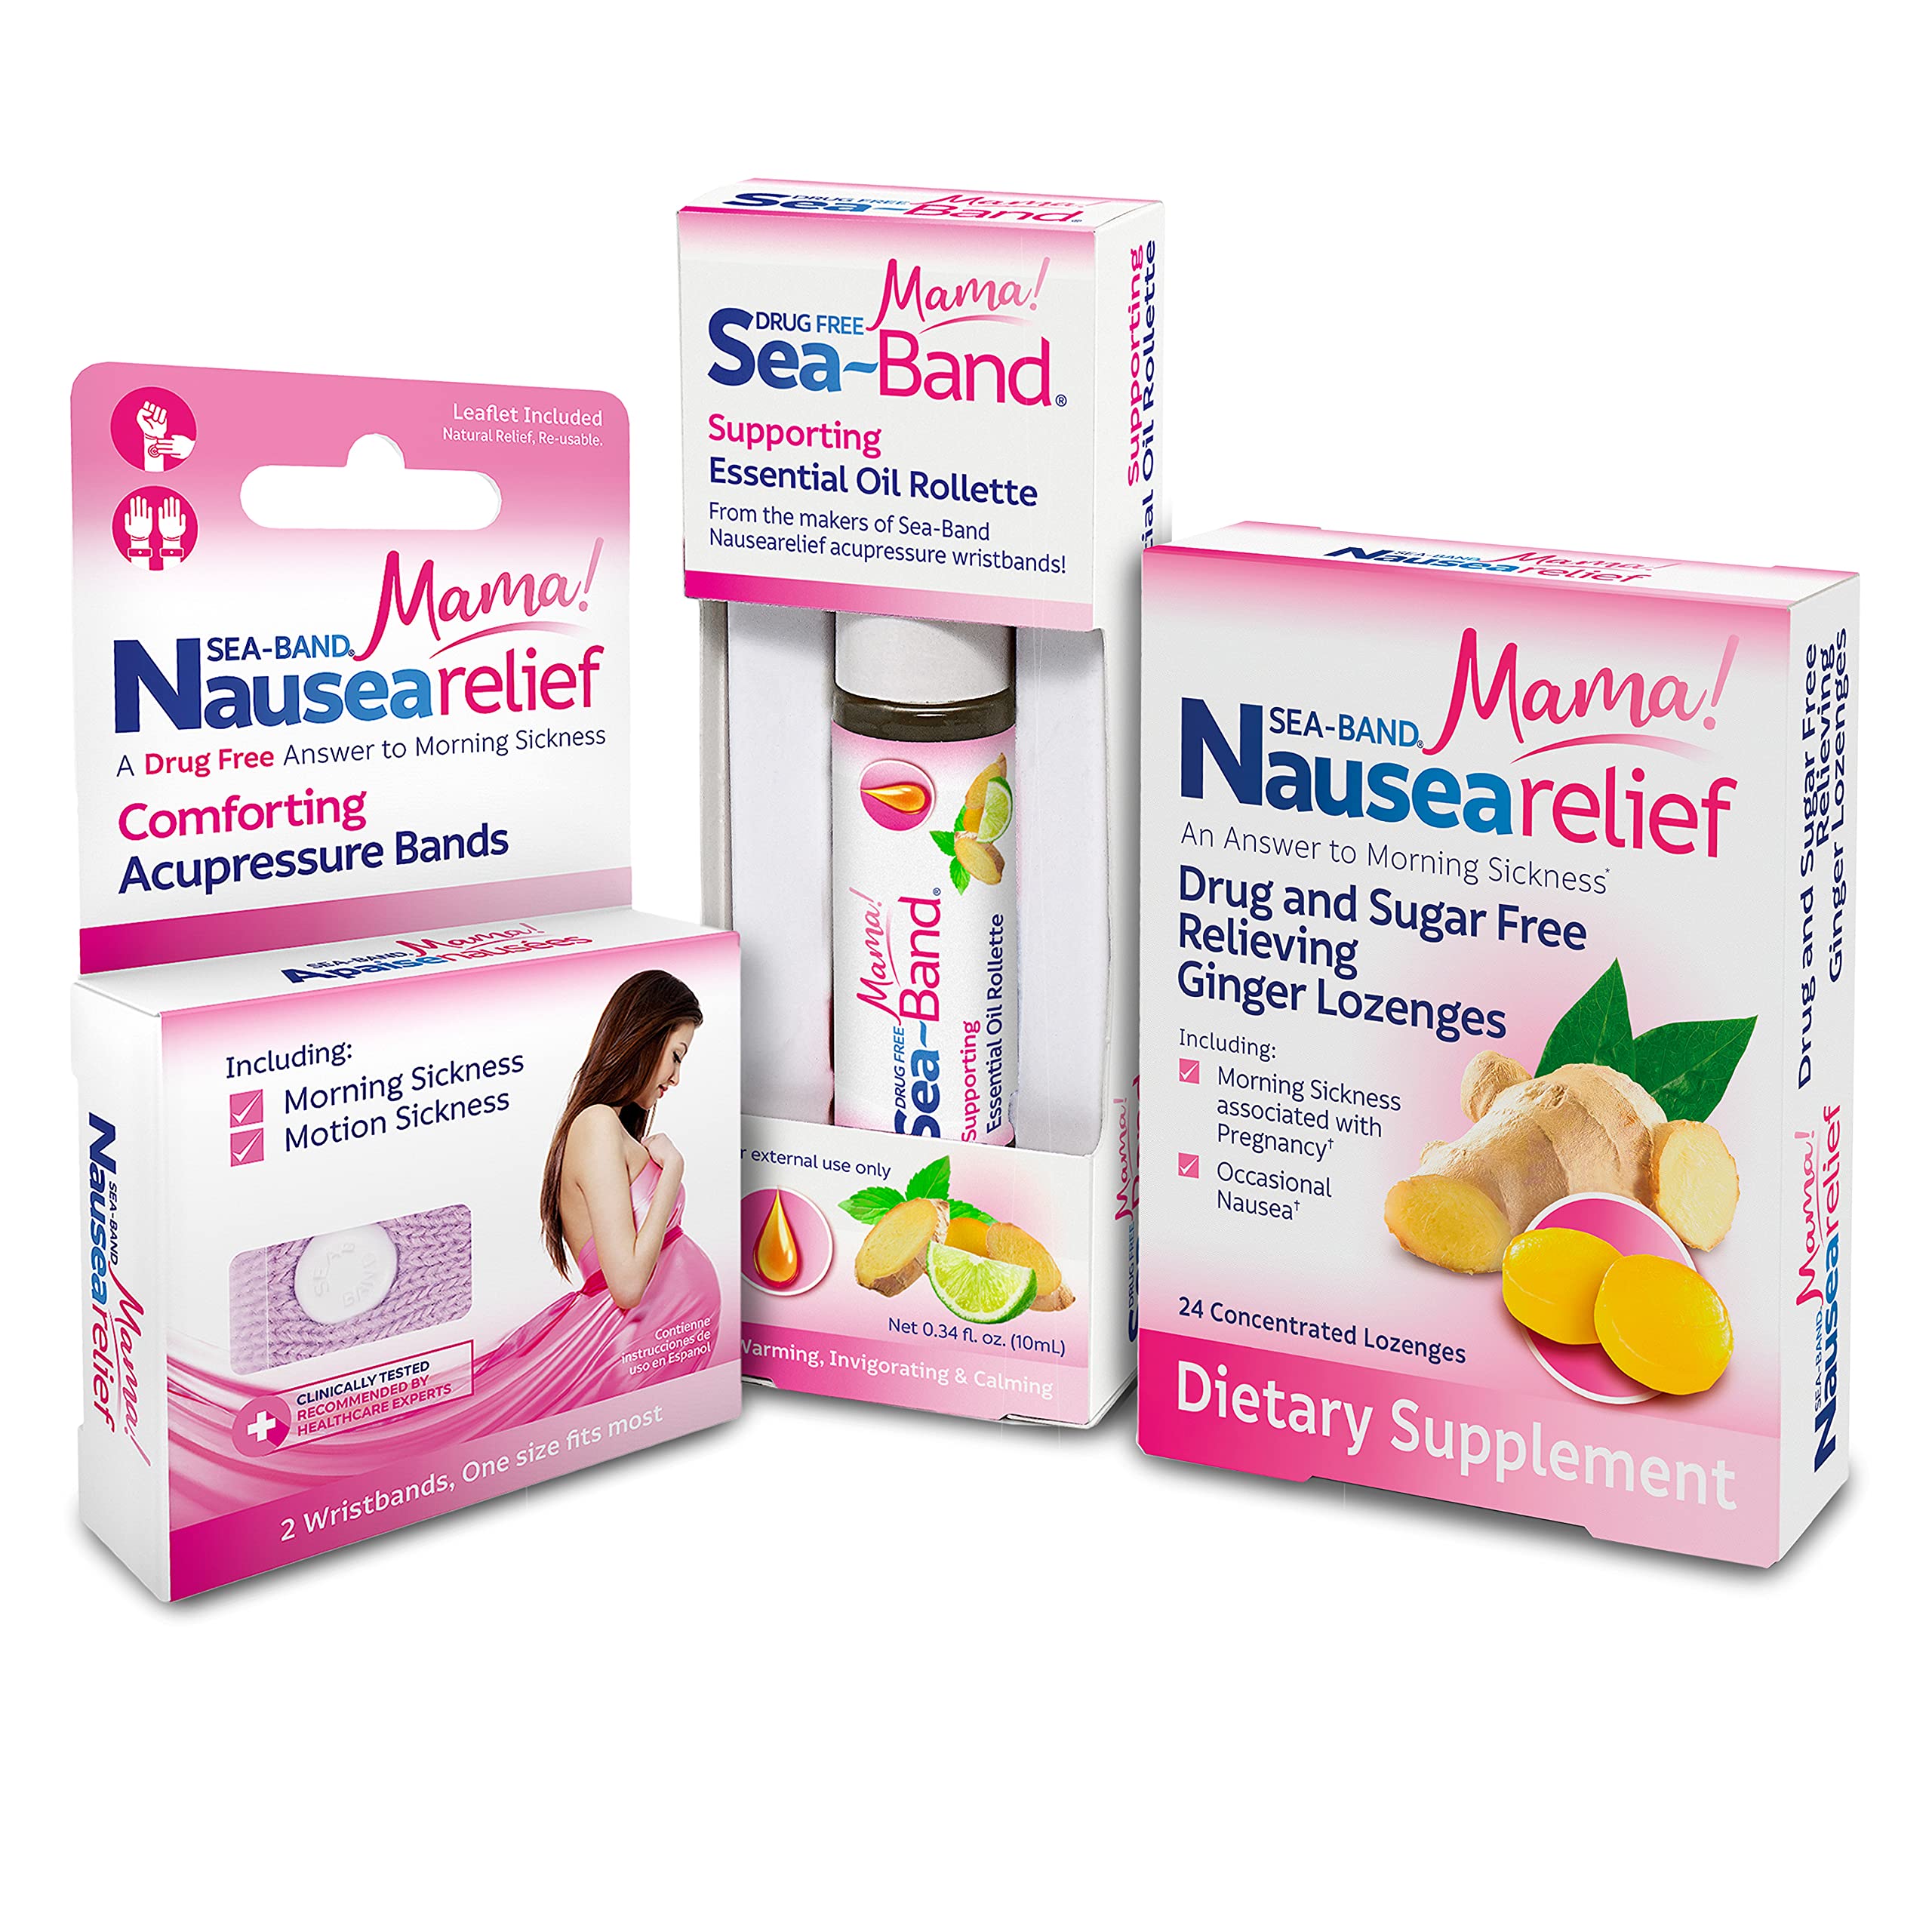 Sea-Band Mama Nausea Relief Pregnancy Kit with Anti-Nausea Acupressure Bands, ginger Lozenges  Essential Oil Rollette